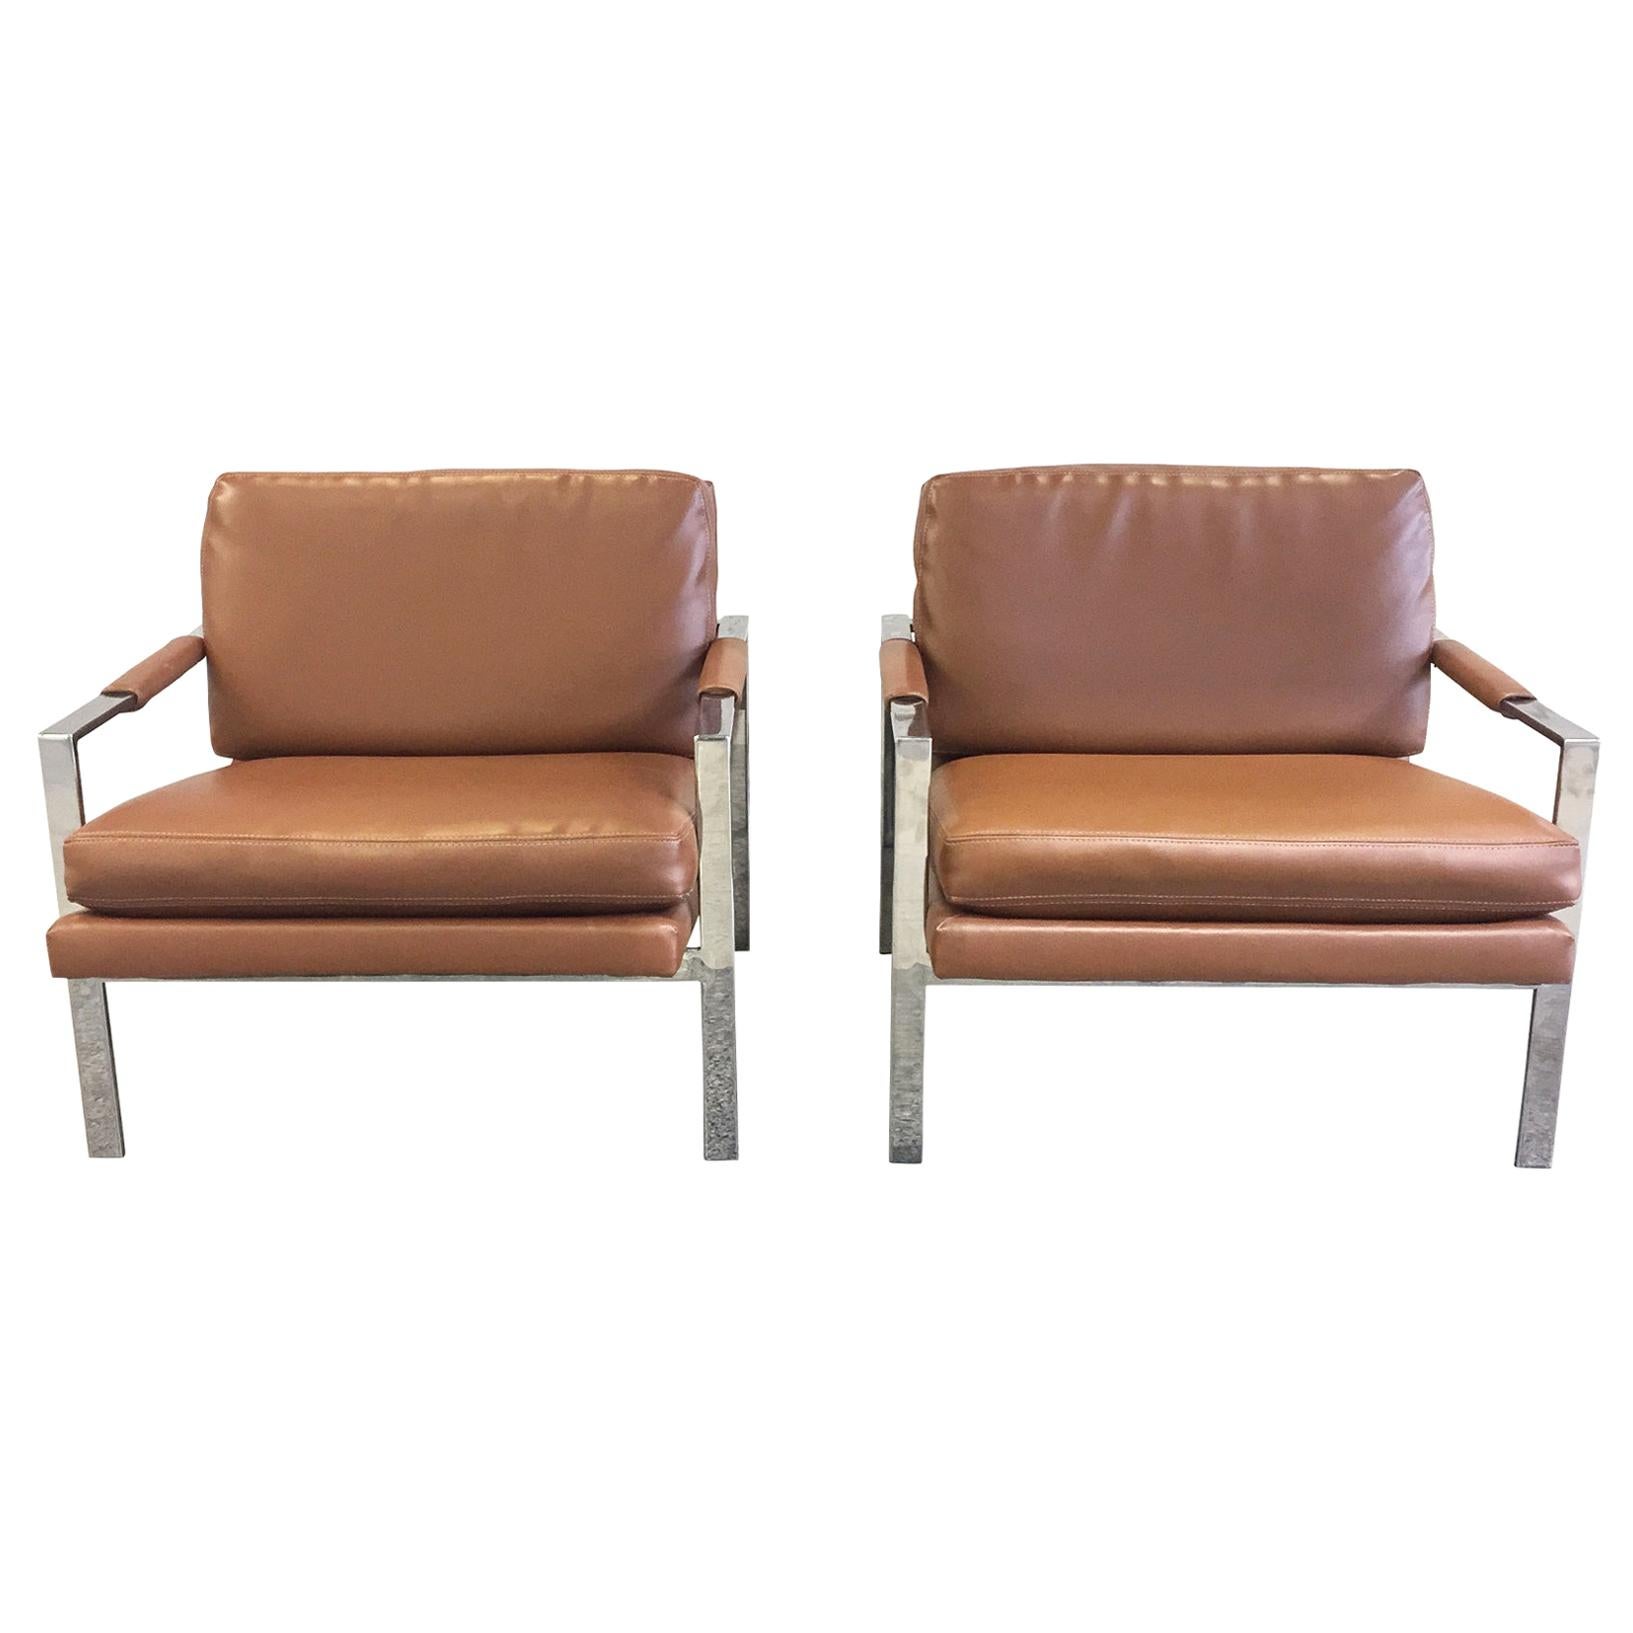 Chrome and Leather Armchairs Attributed to Milo Baughman, a Pair